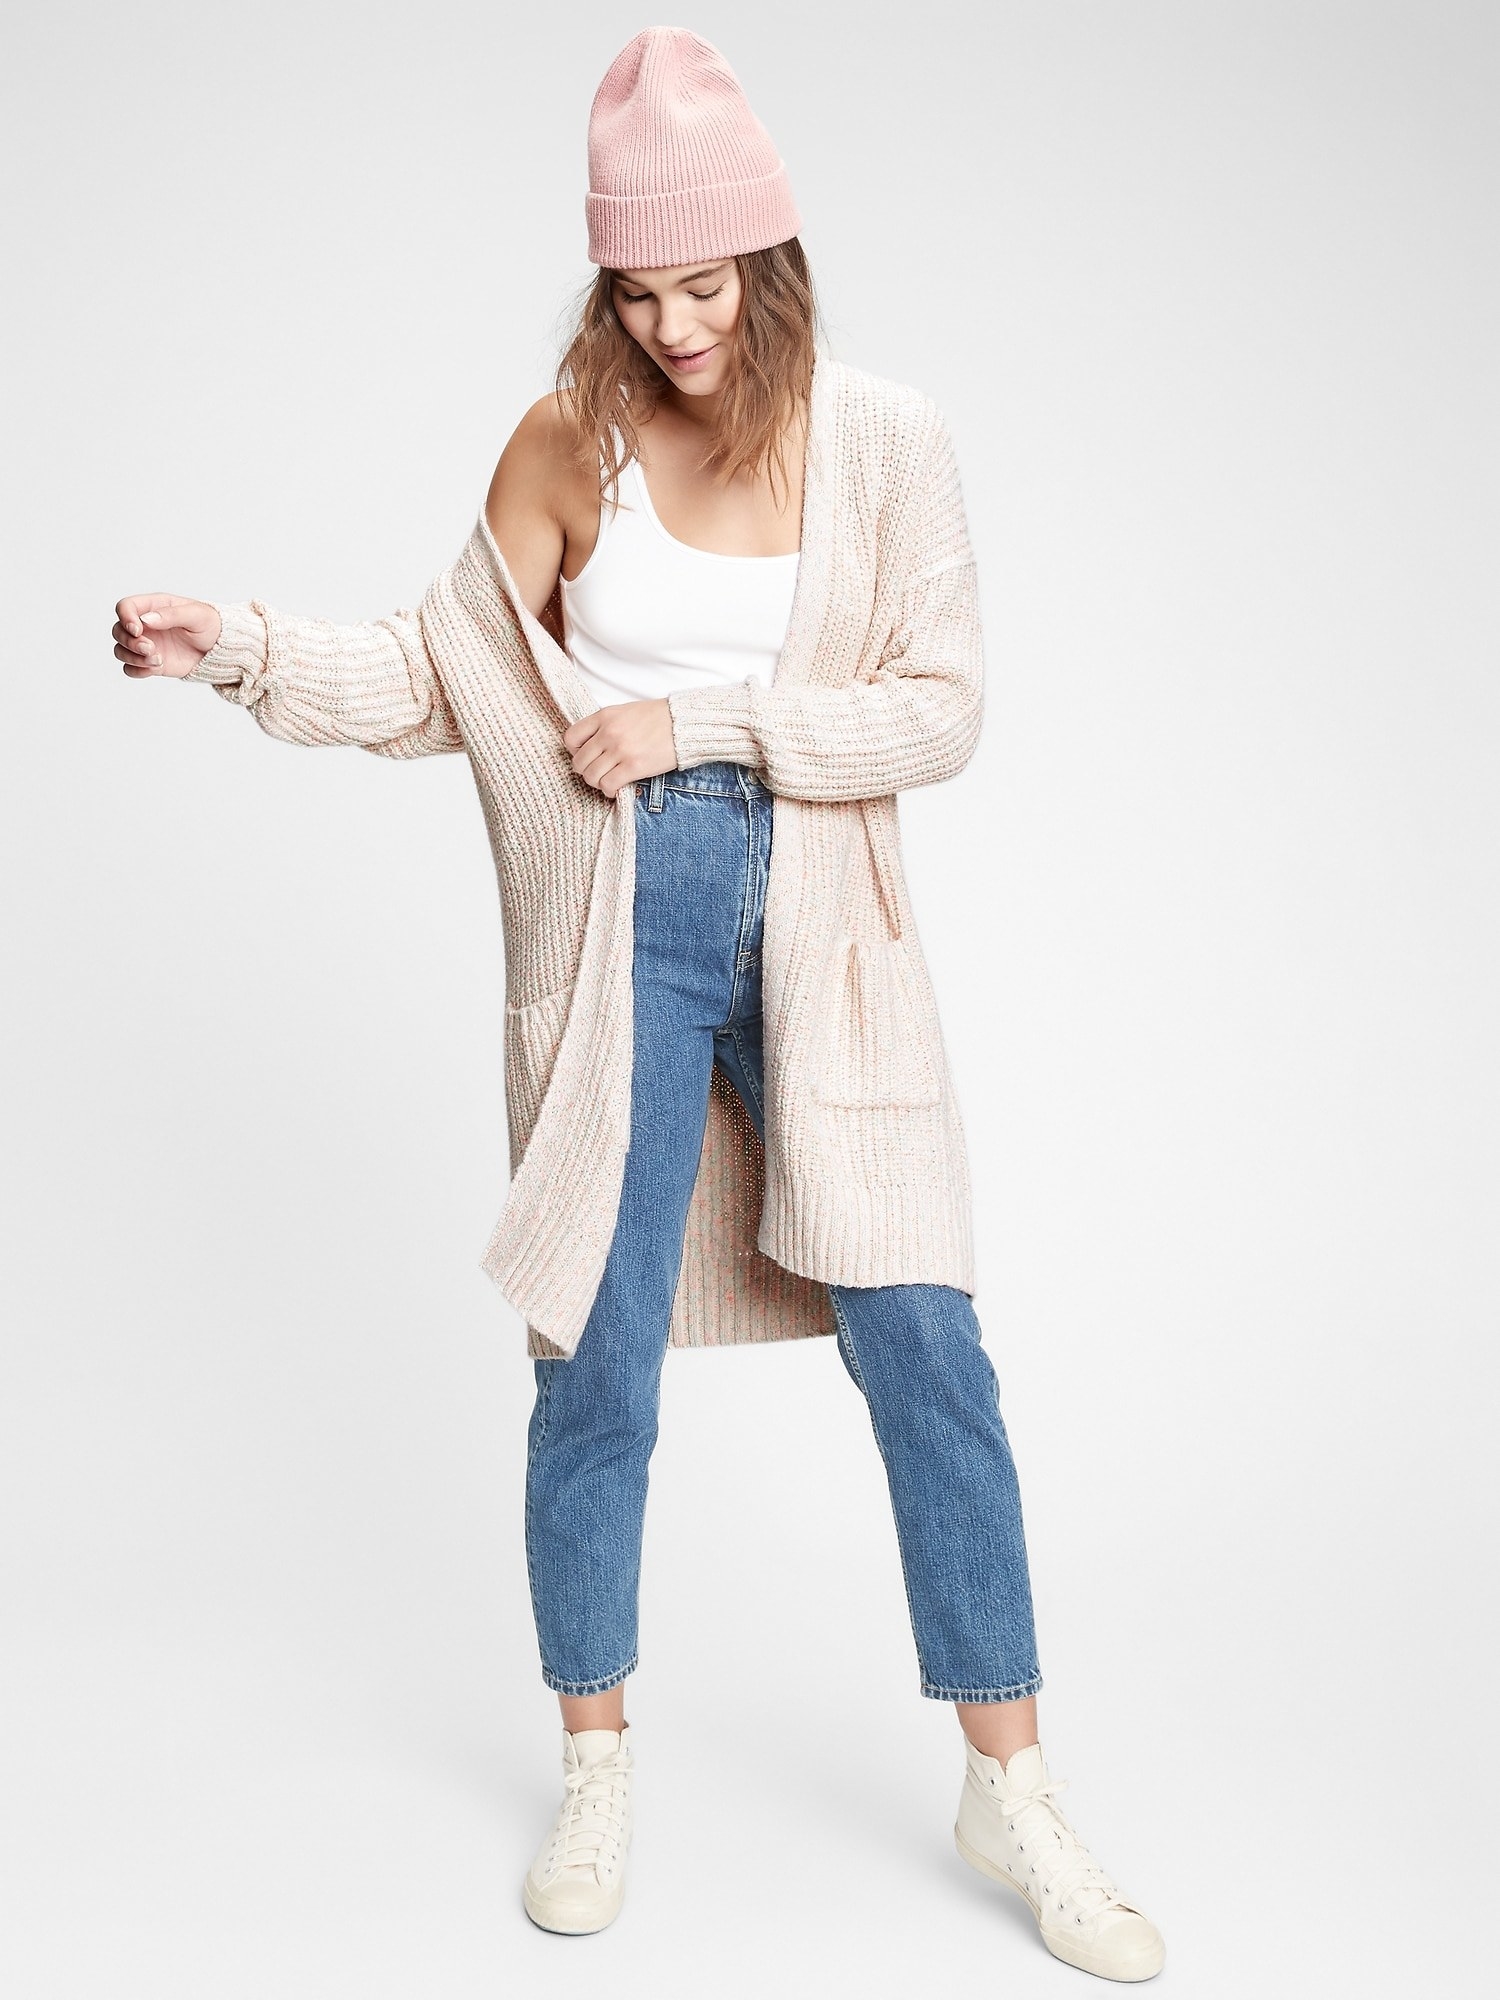 a model in an oatmeal colored long cardigan